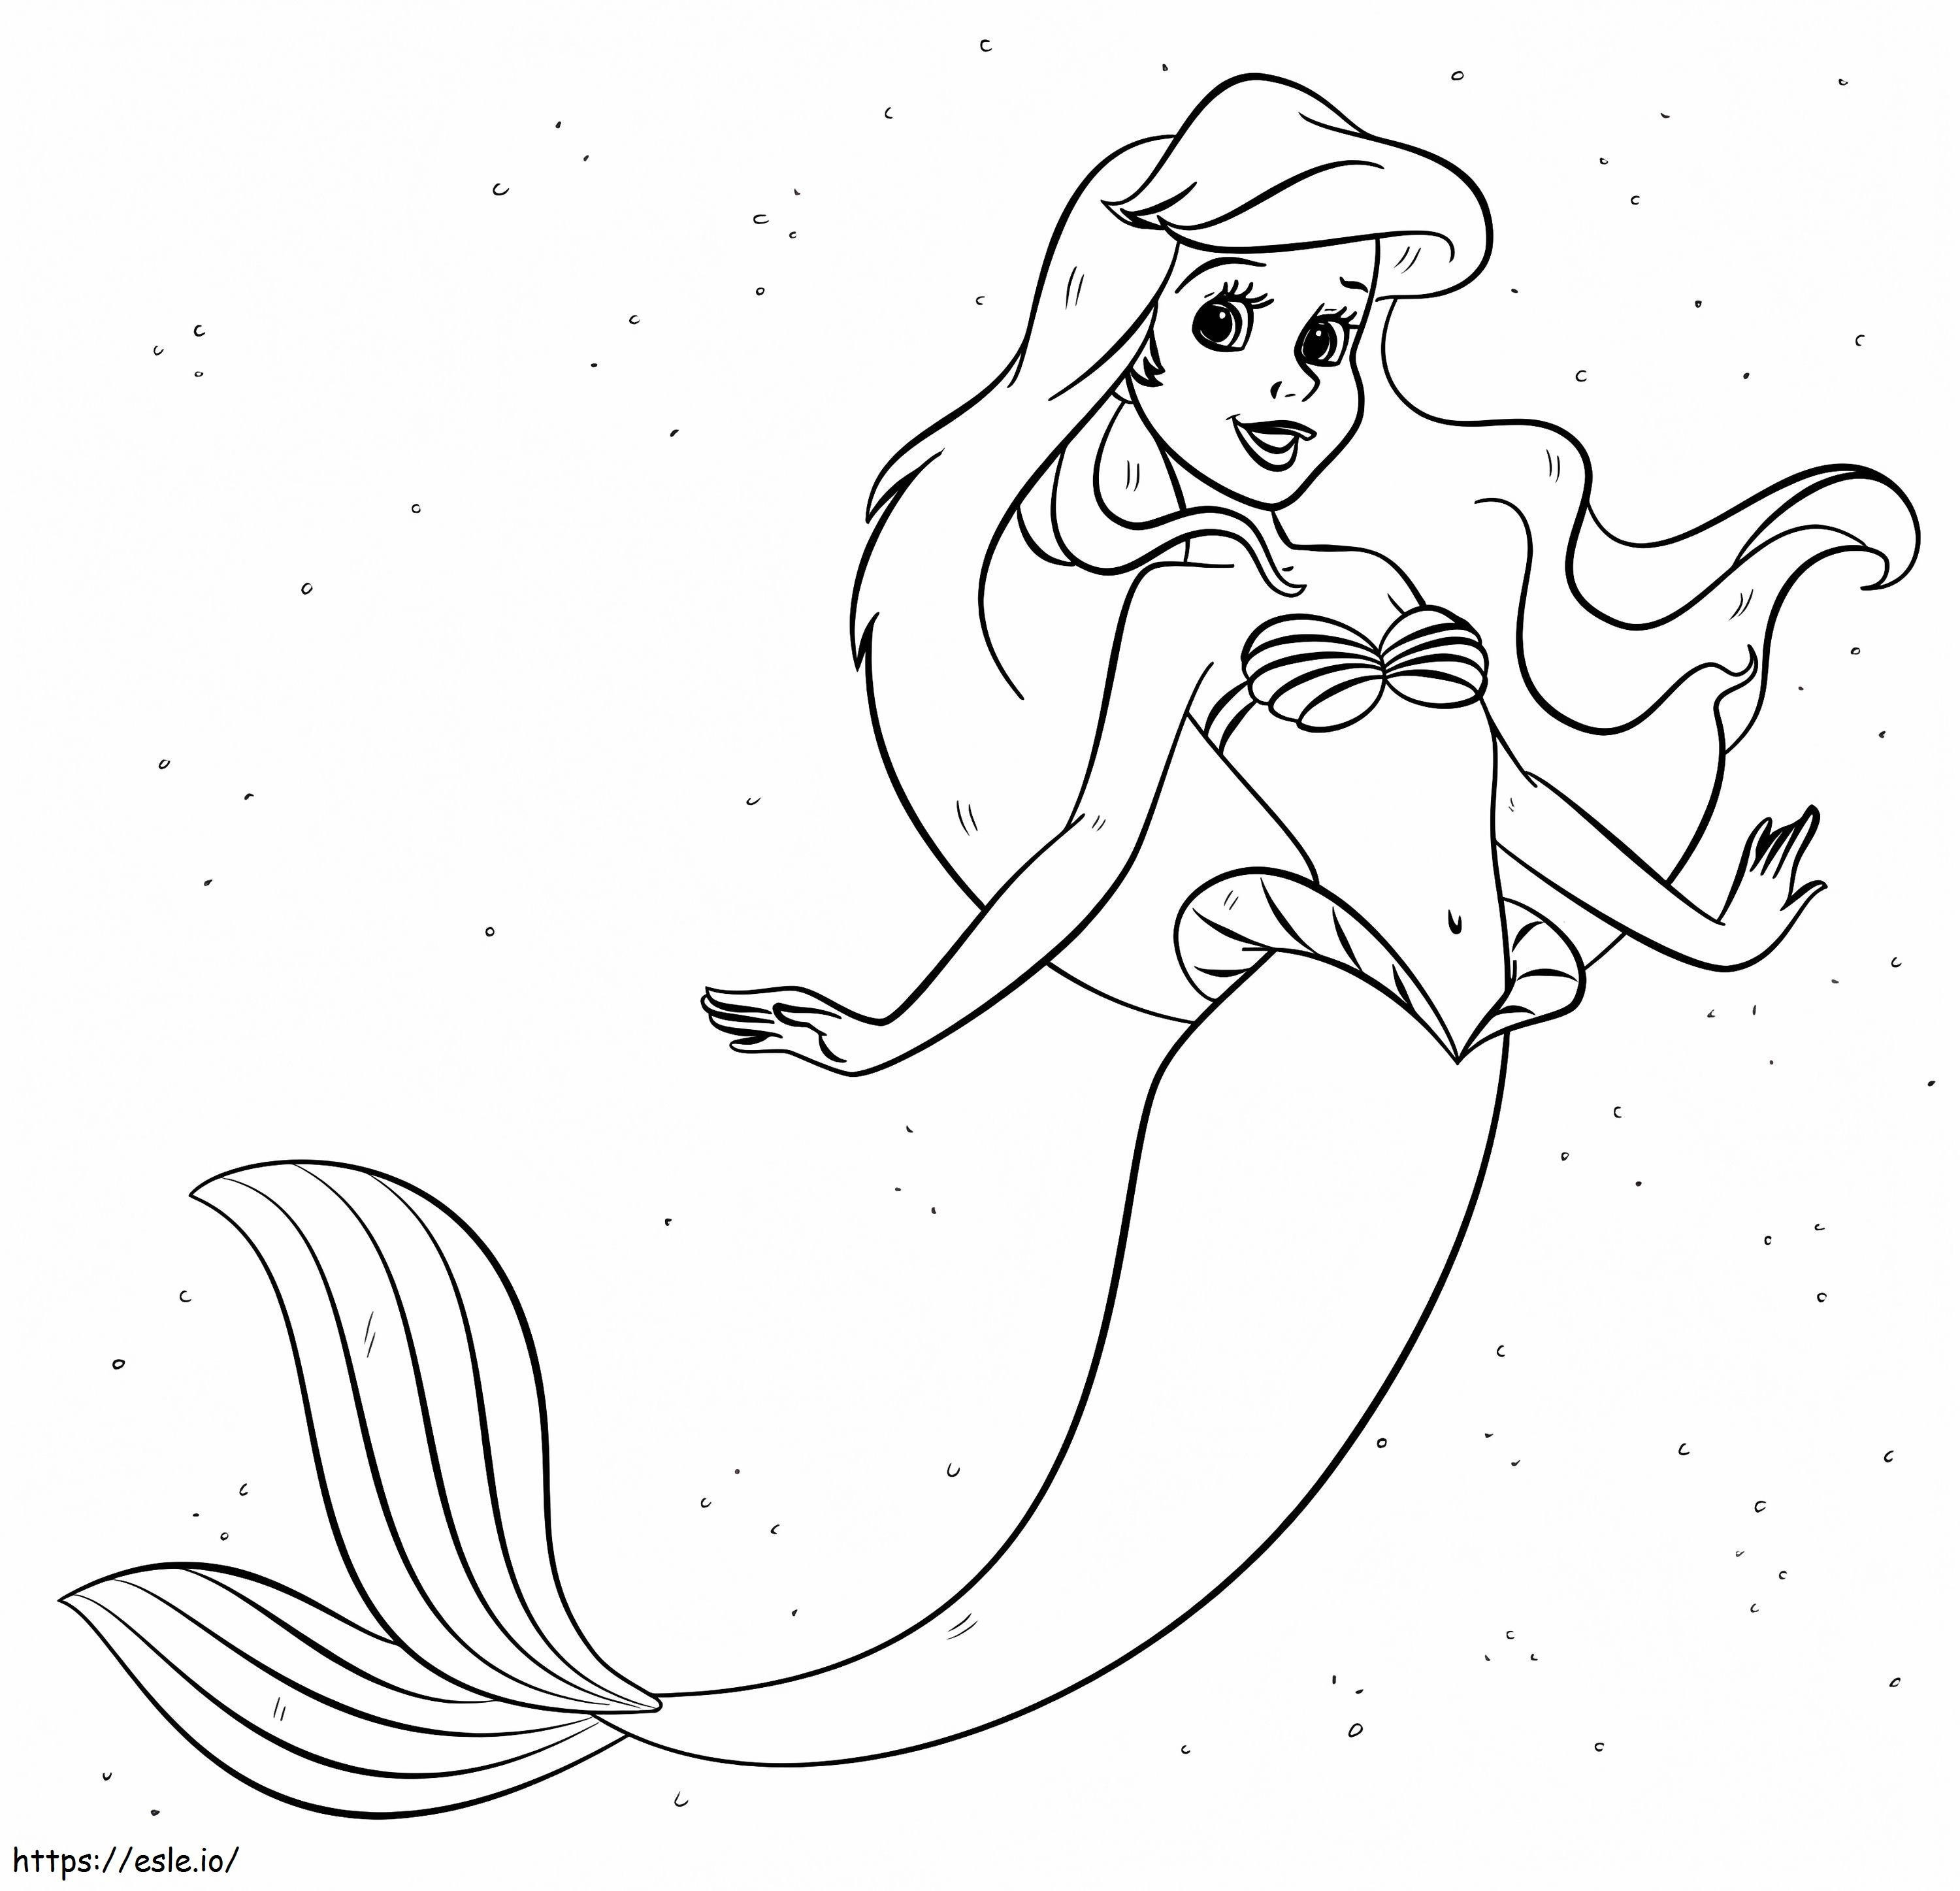 Ariel From The Little Mermaid coloring page